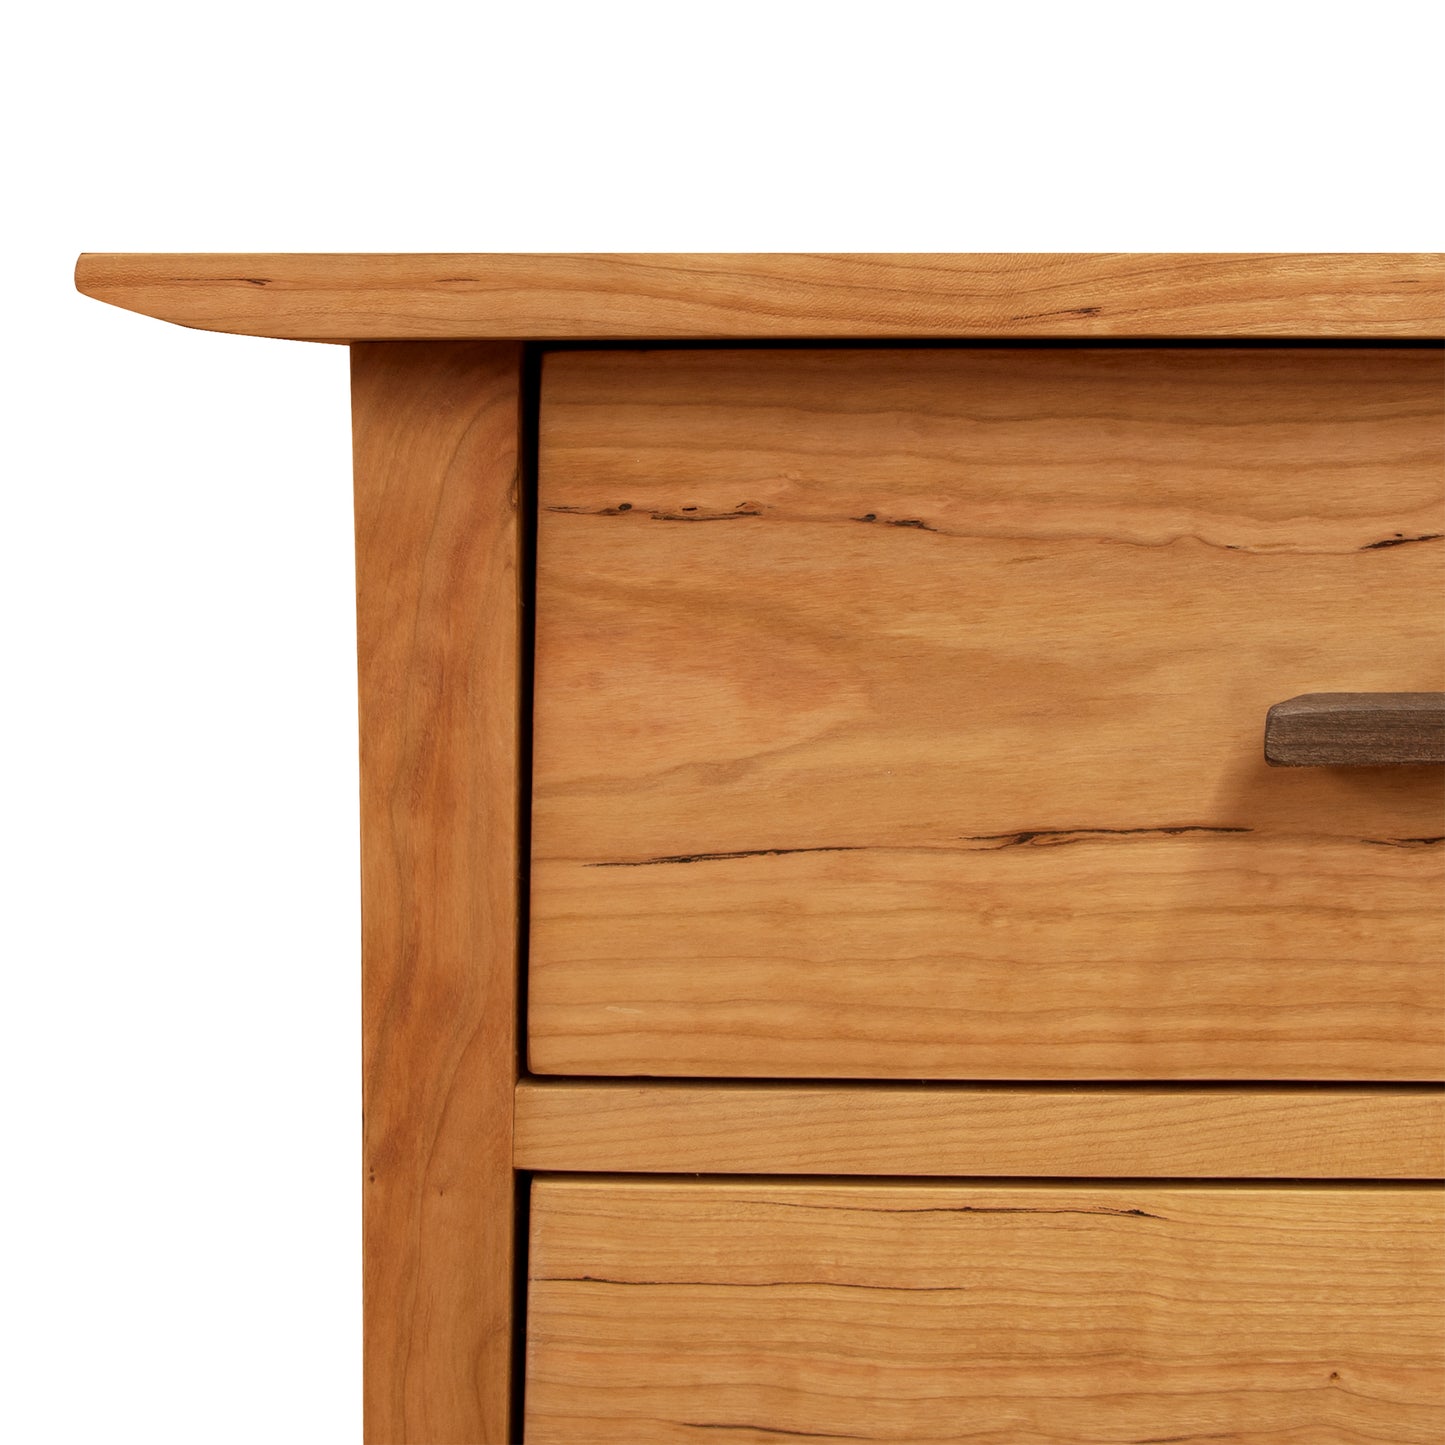 Close-up of a wooden desk corner with a drawer featuring minimalist walnut drawer pulls, showcasing seamless craftsmanship and natural wood grain details. White background. - Close-up of a Vermont Furniture Designs Contemporary Craftsman 6-Drawer Dresser corner with a drawer featuring minimalist walnut drawer pulls, showcasing seamless craftsmanship and natural wood grain details. White background.